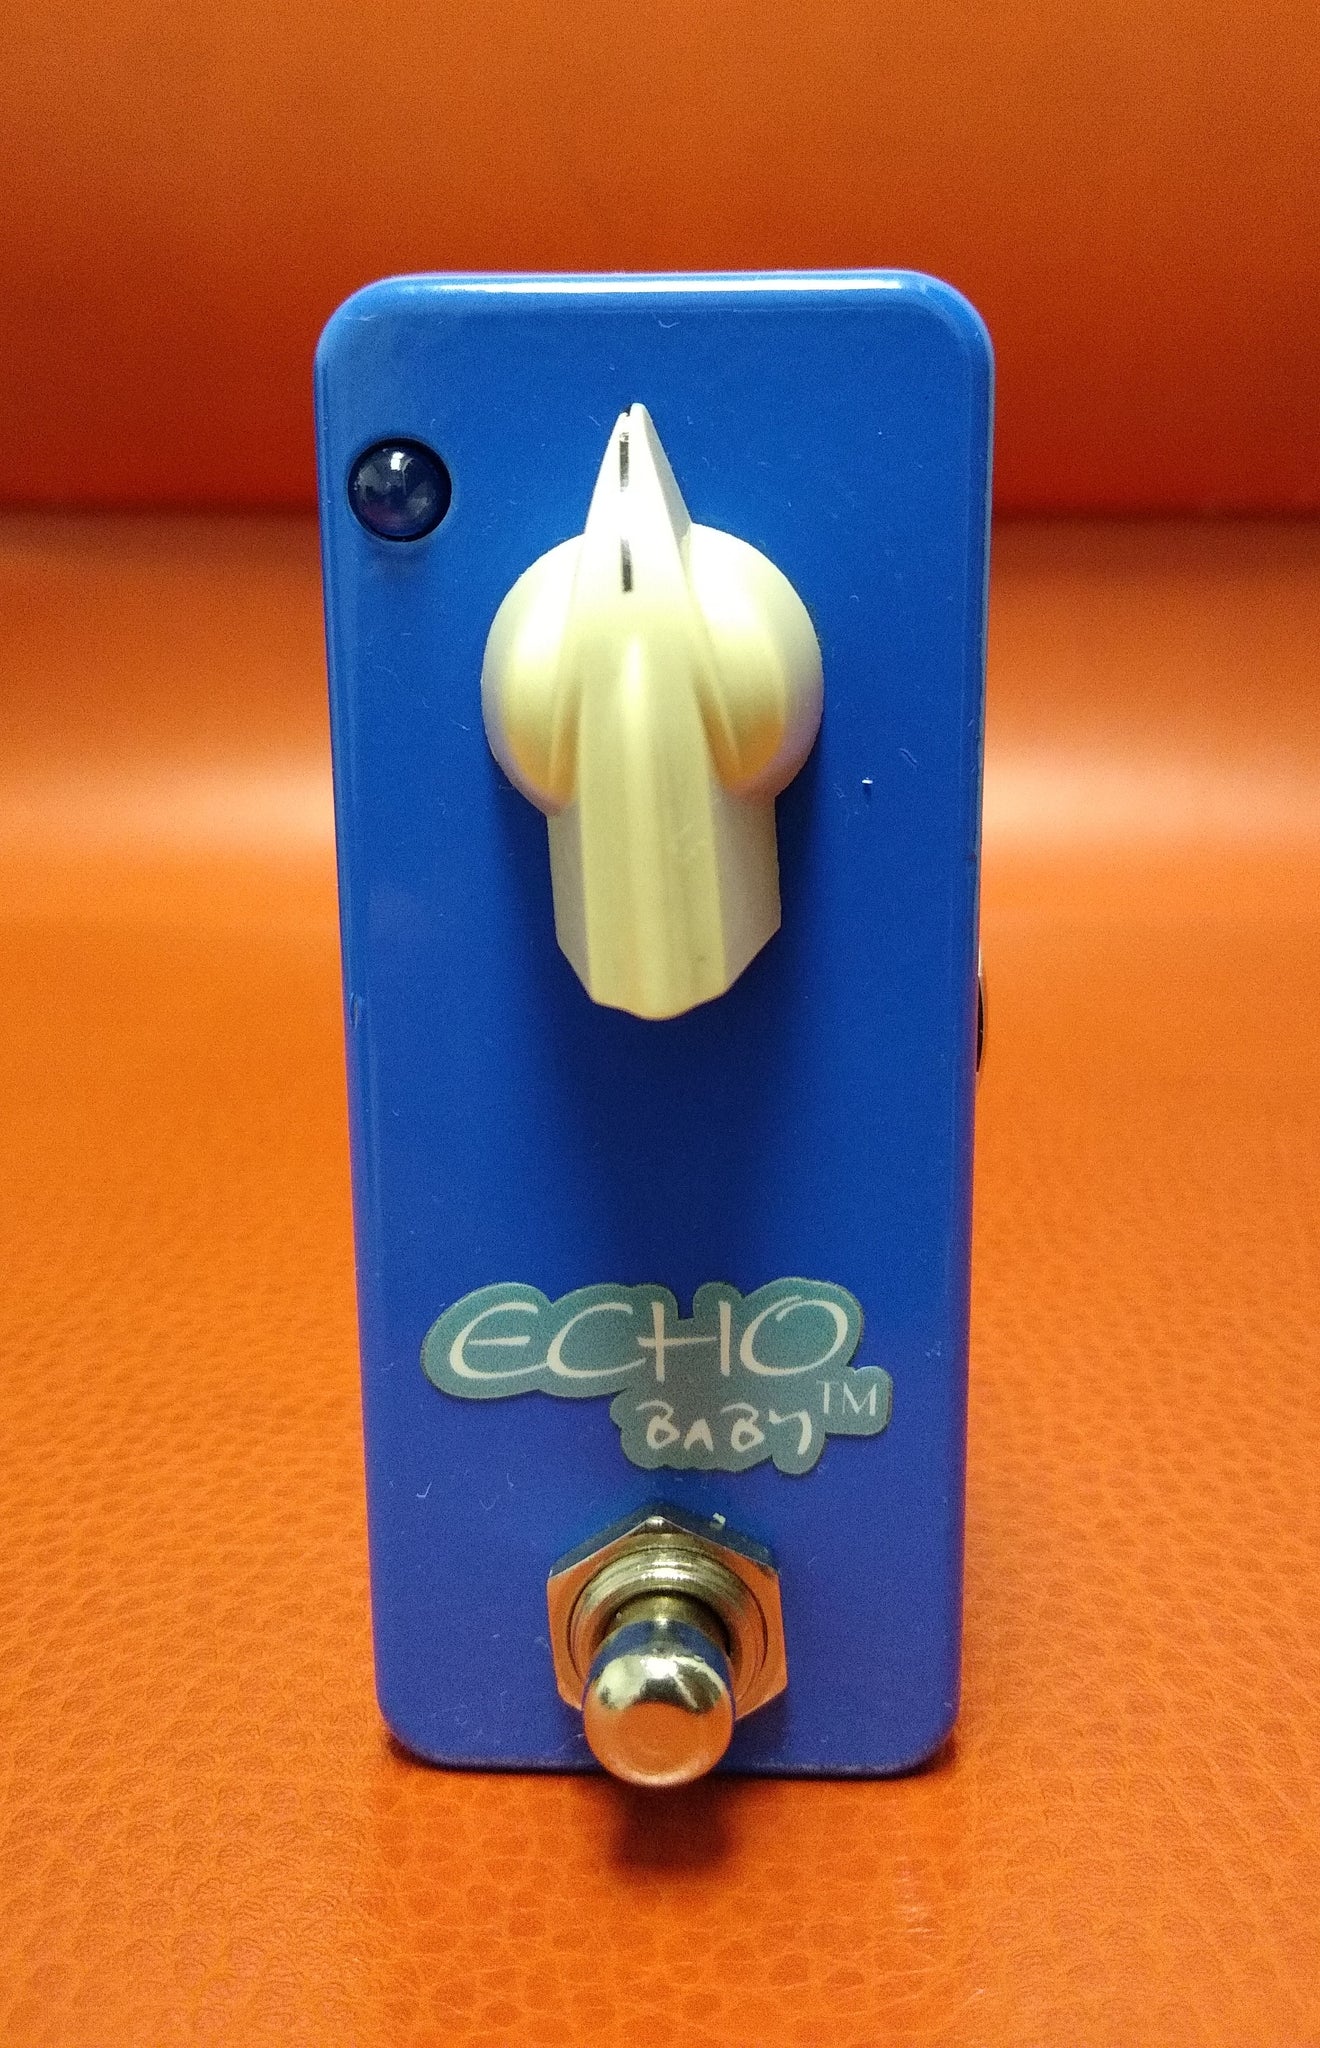 Lovepedal Echo Baby Delay used